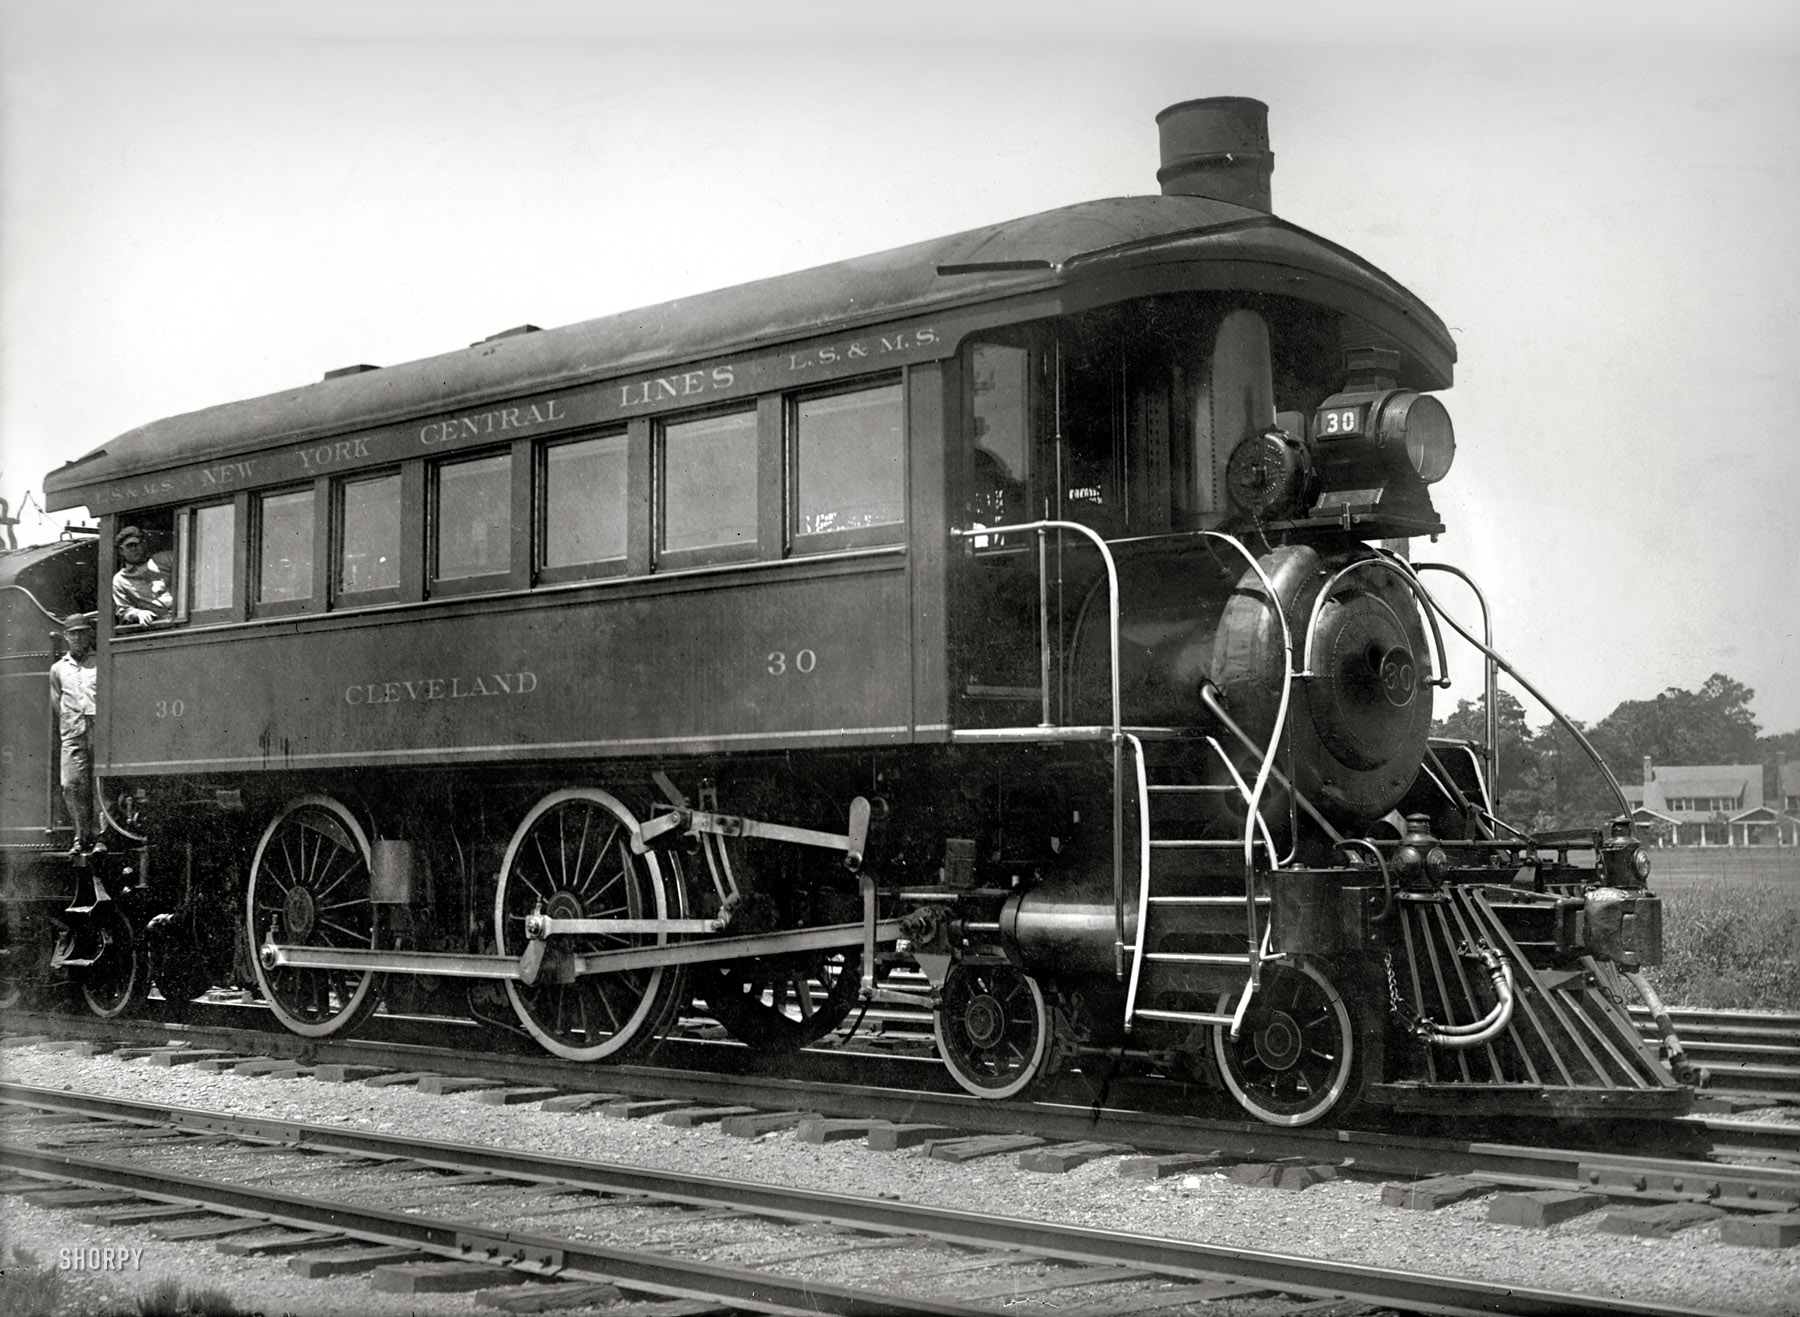 Circa 1910. "Passenger (observation) locomotive train car of New York Central R.R." 5x7 glass negative, George Grantham Bain Collection. View full size.